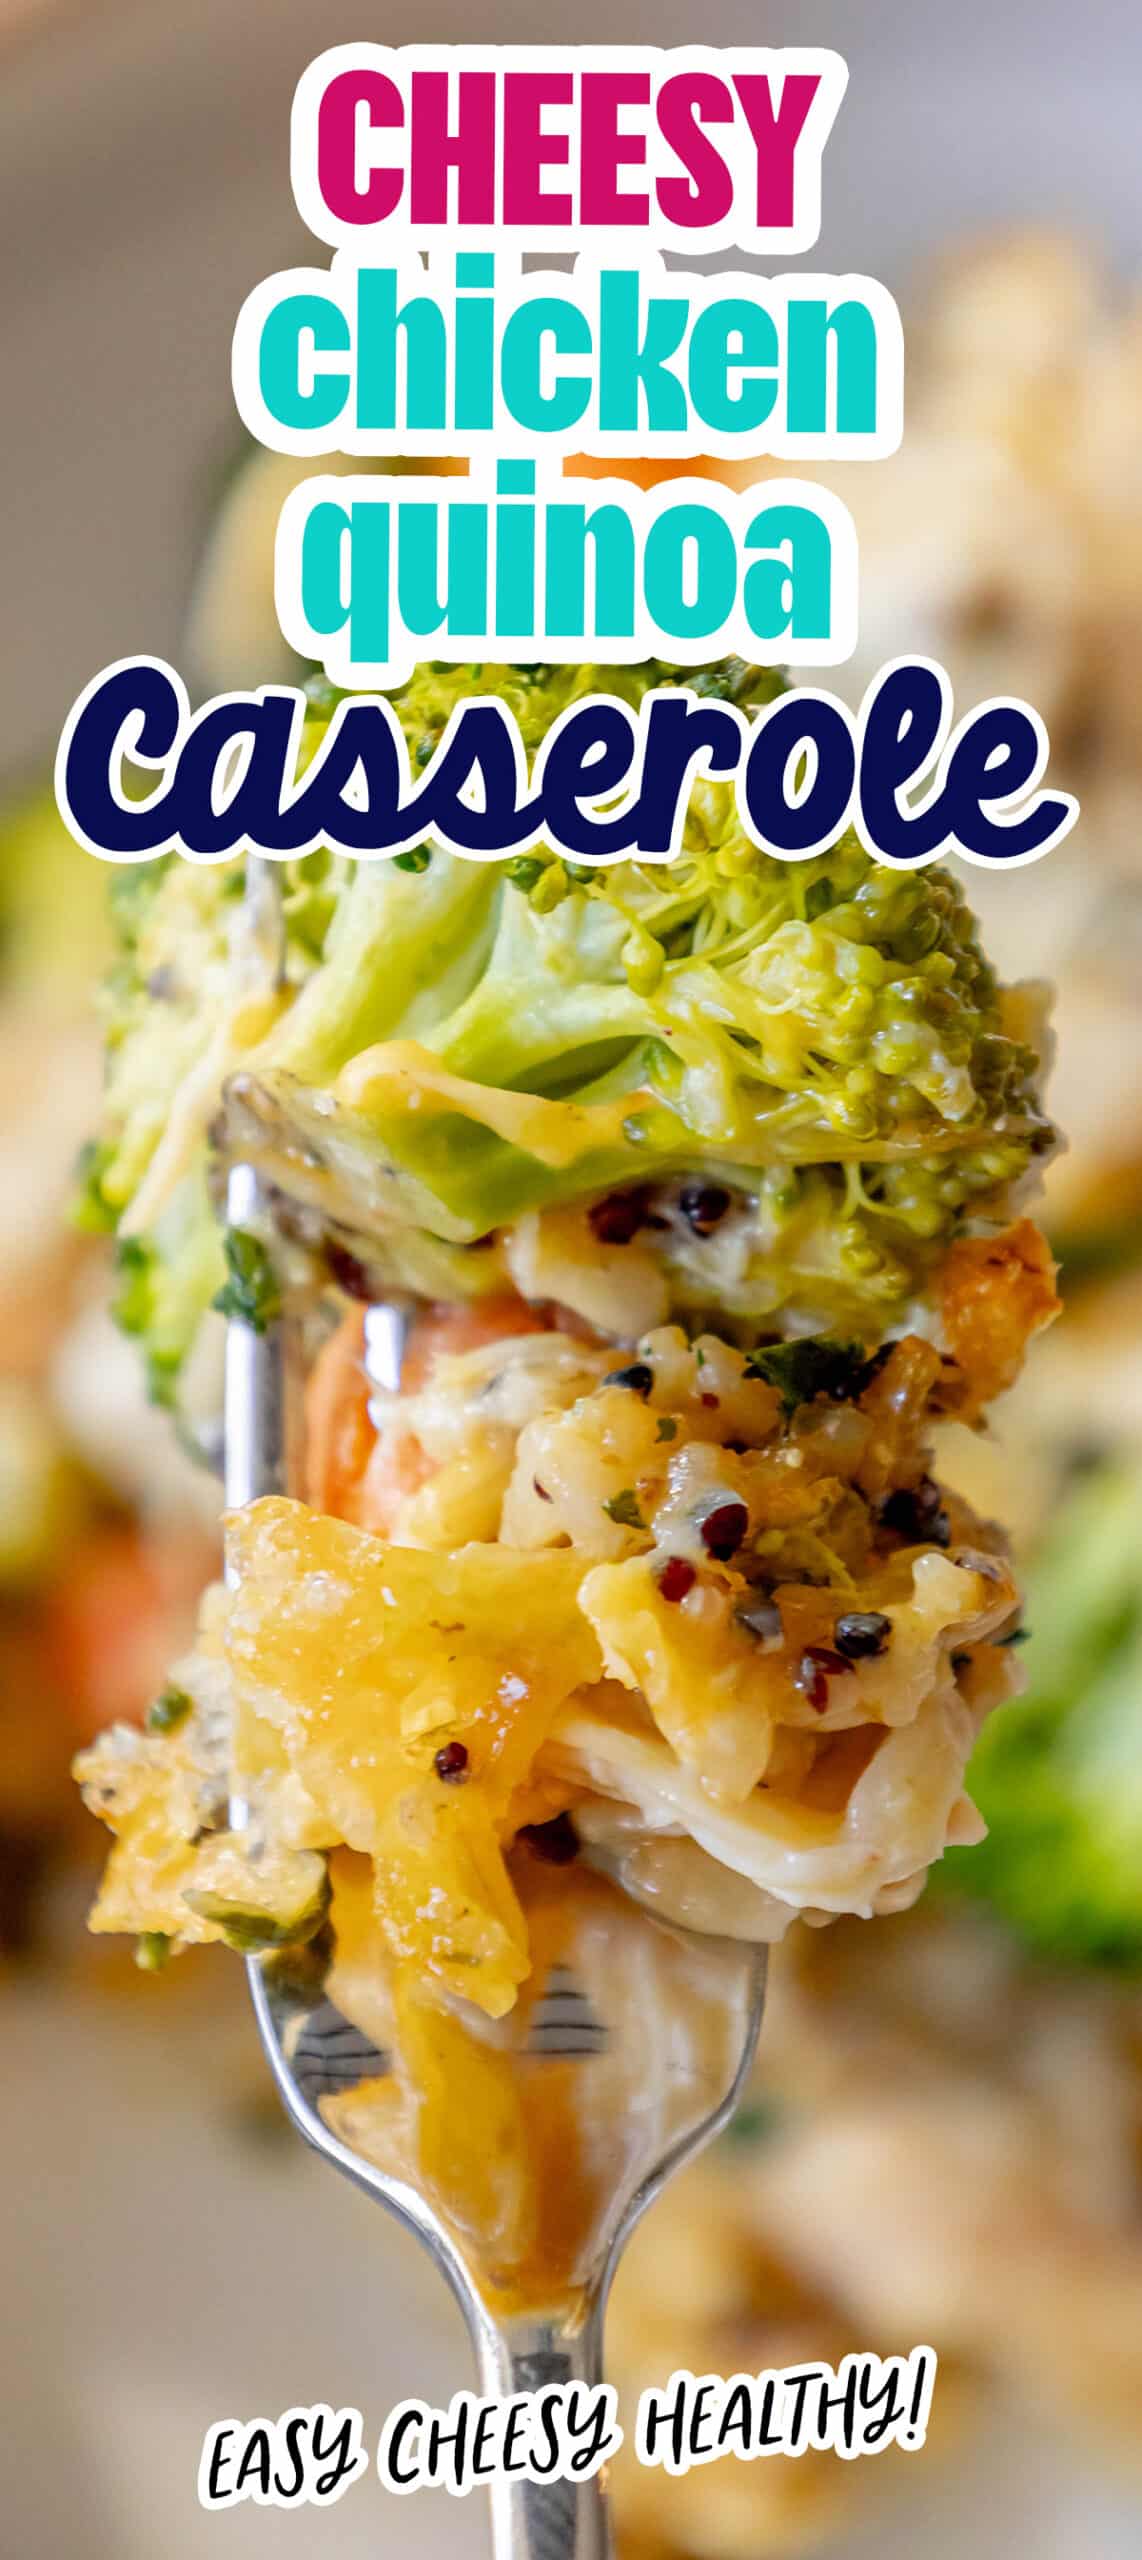 A delicious and hearty casserole made with tender chicken and nutritious Quinoa, topped with melted cheese.